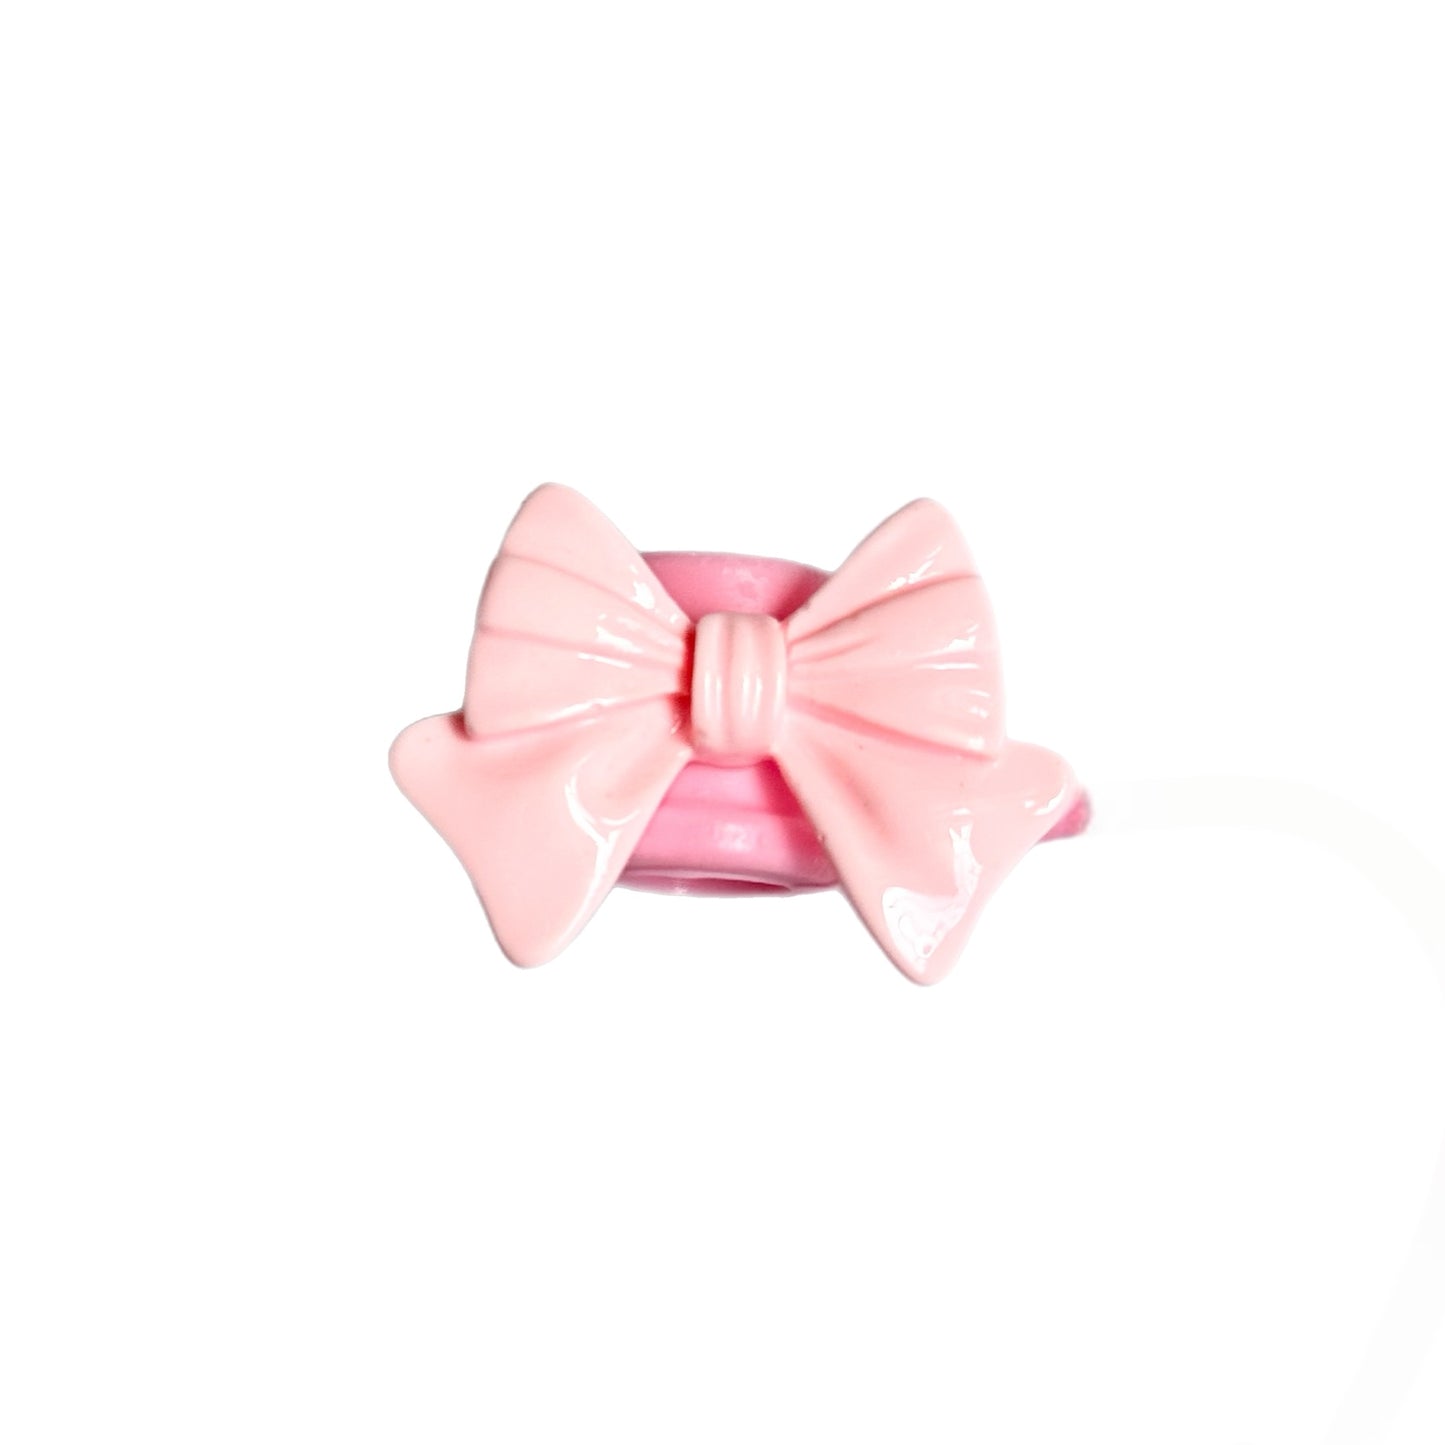 Girly Bow Straw Topper